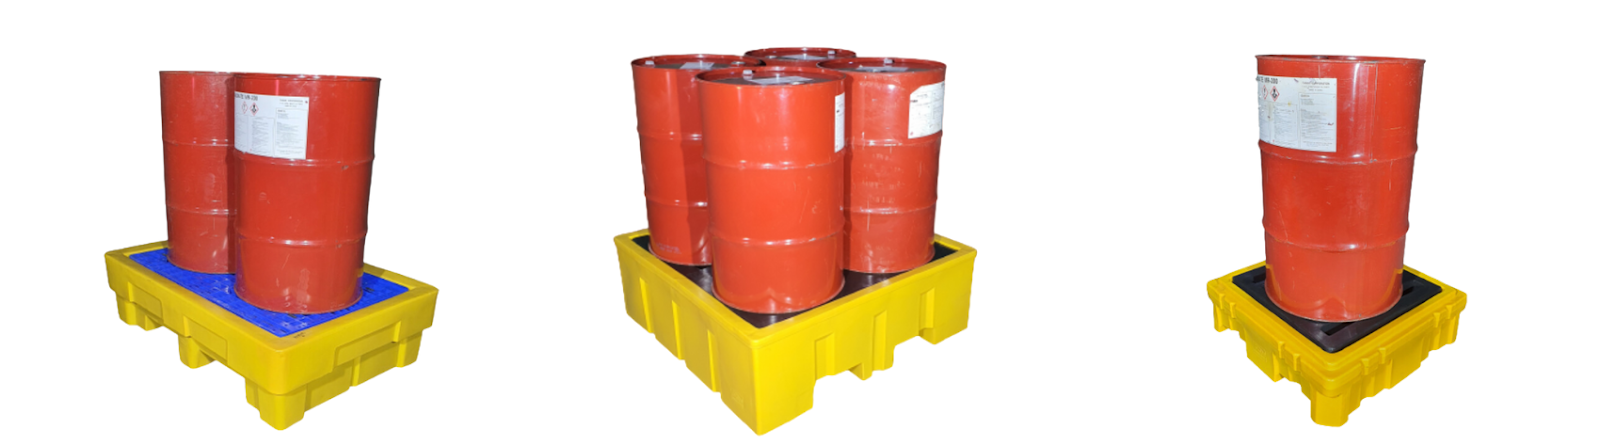 Swift's Double Wall Drum Spill Containment Pallets 